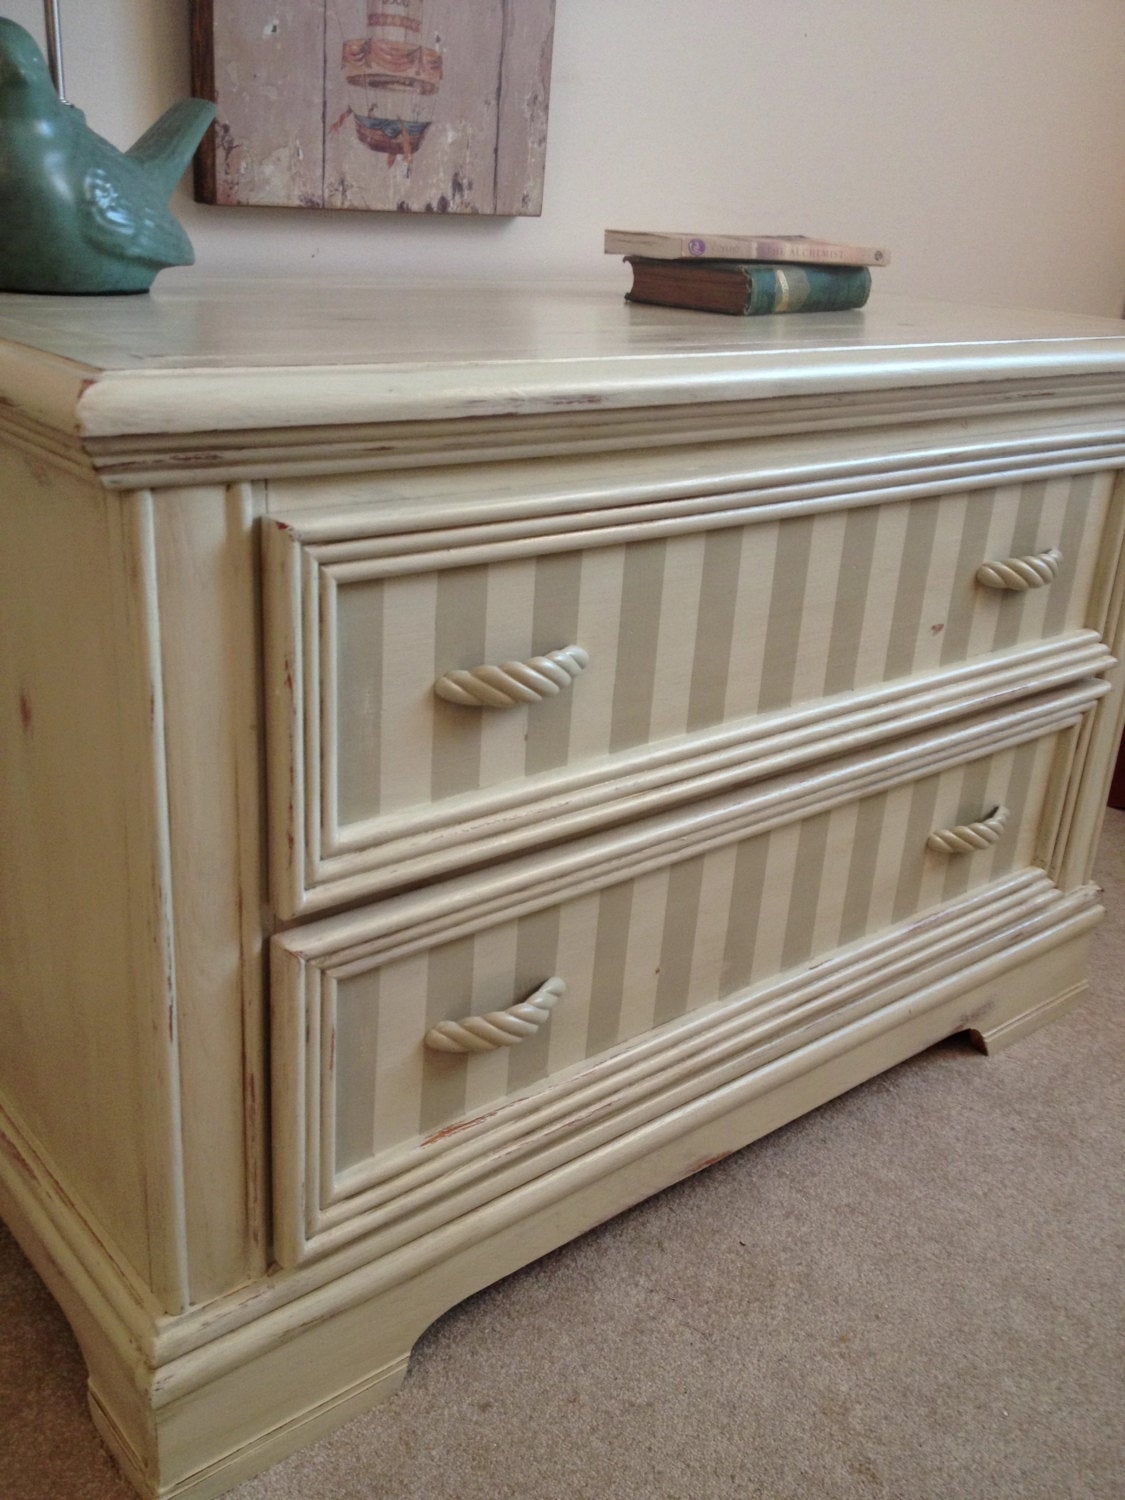 Chic cream dresser chest french country shabby chic rustic distressed